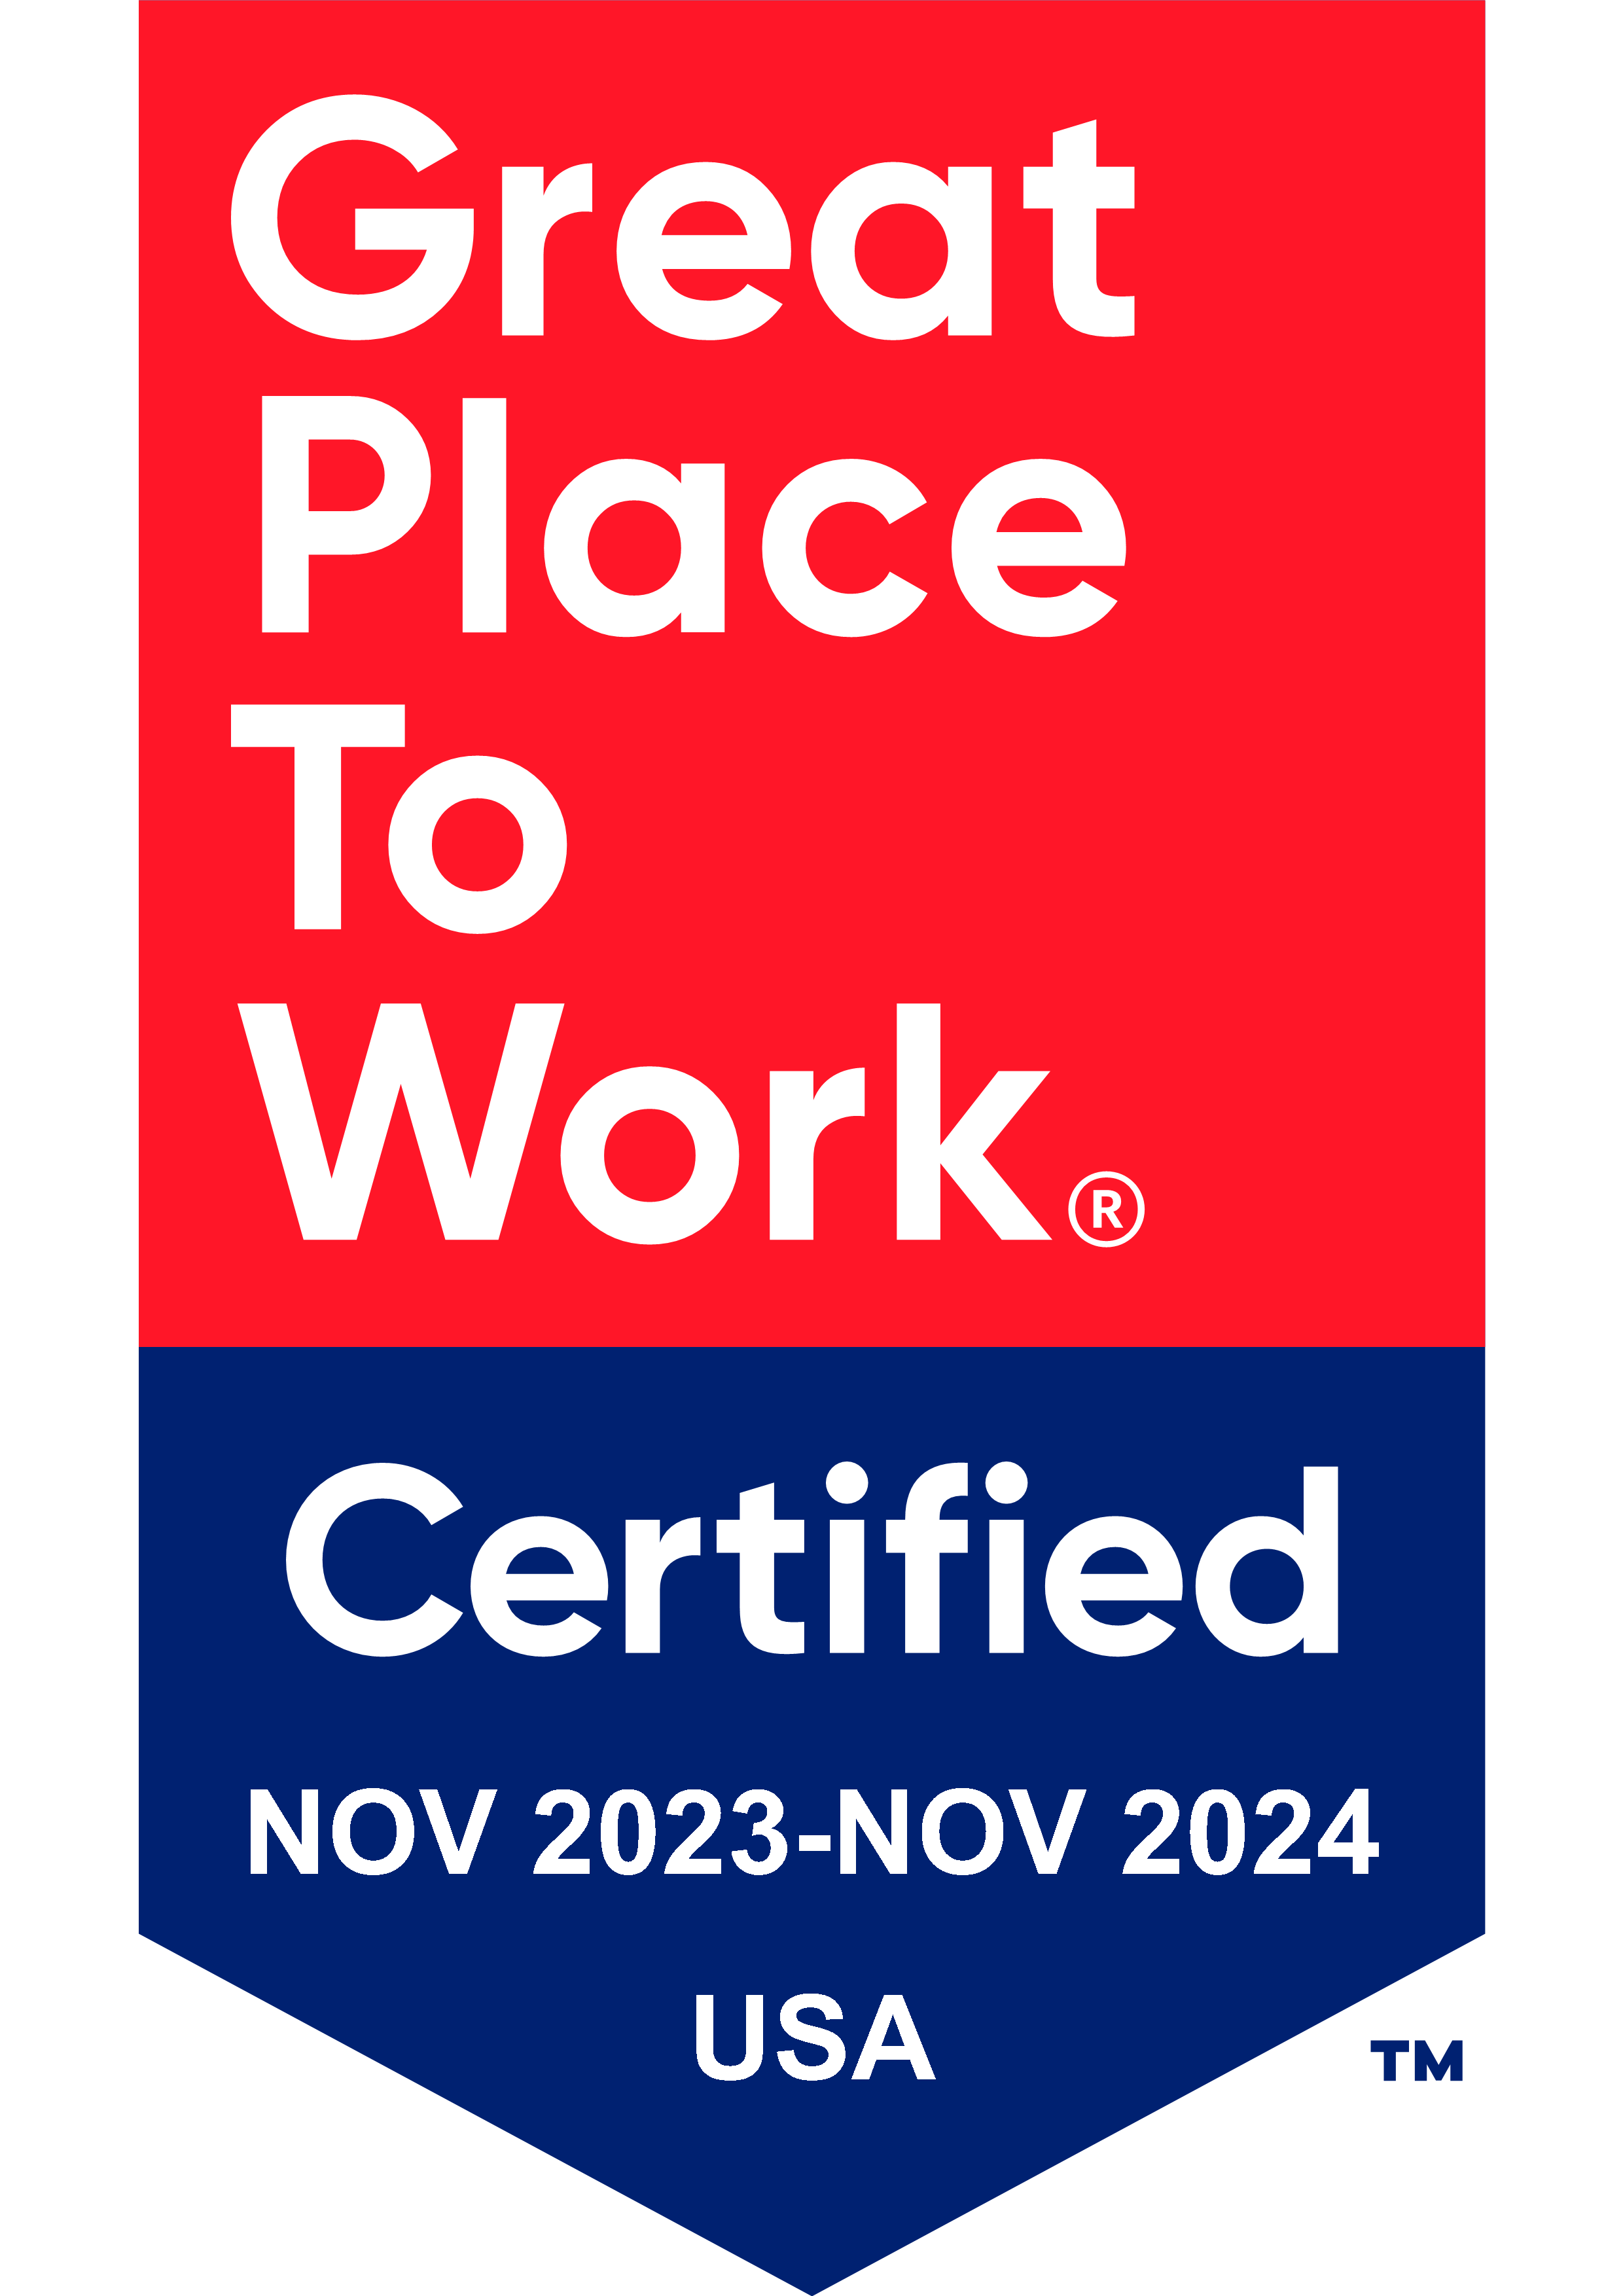 Great Place to Work Certified. November 2021 - November 2022